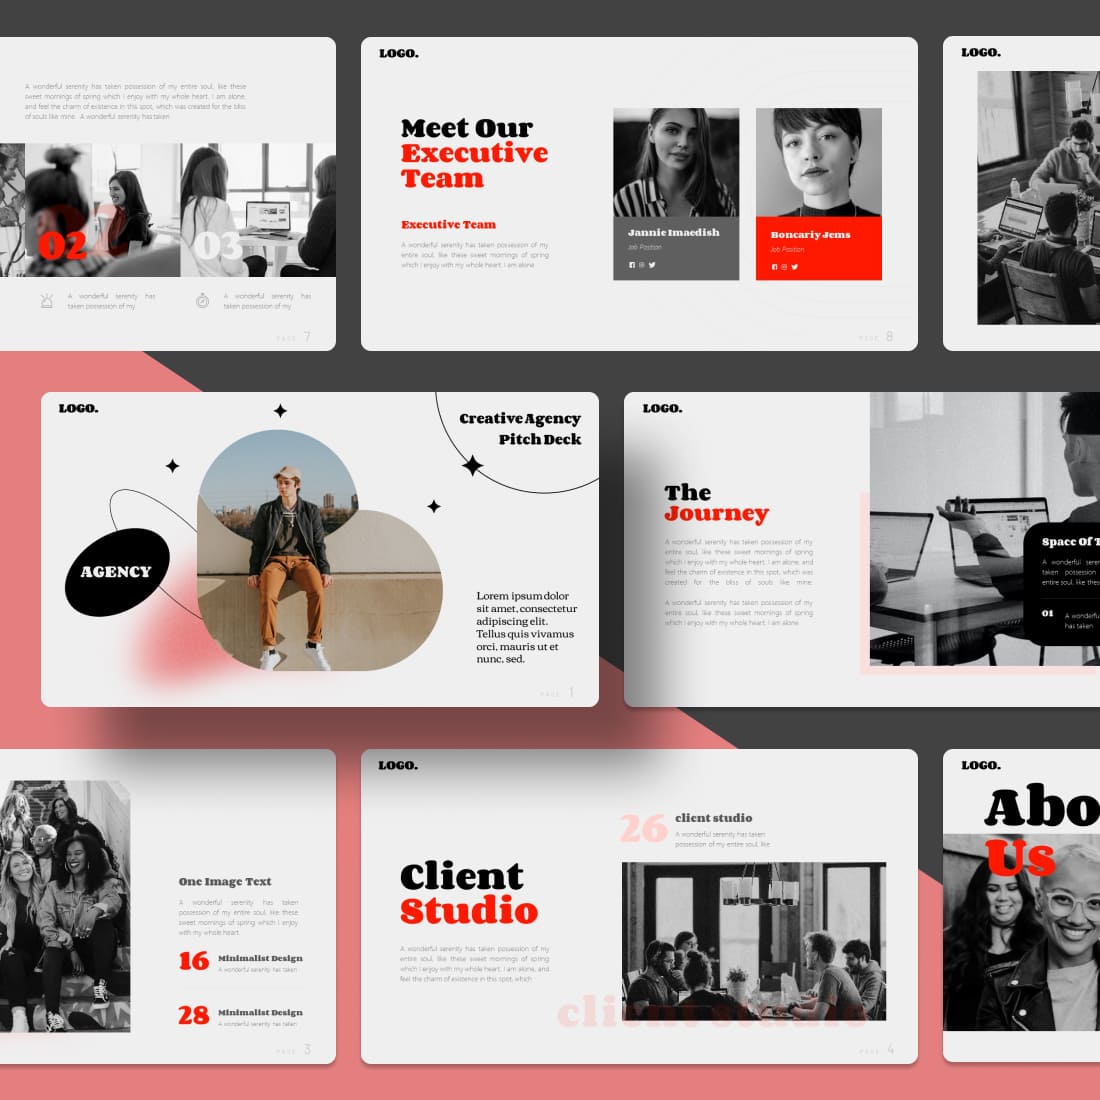 Agency Pitch Deck Google Slides Theme cover.